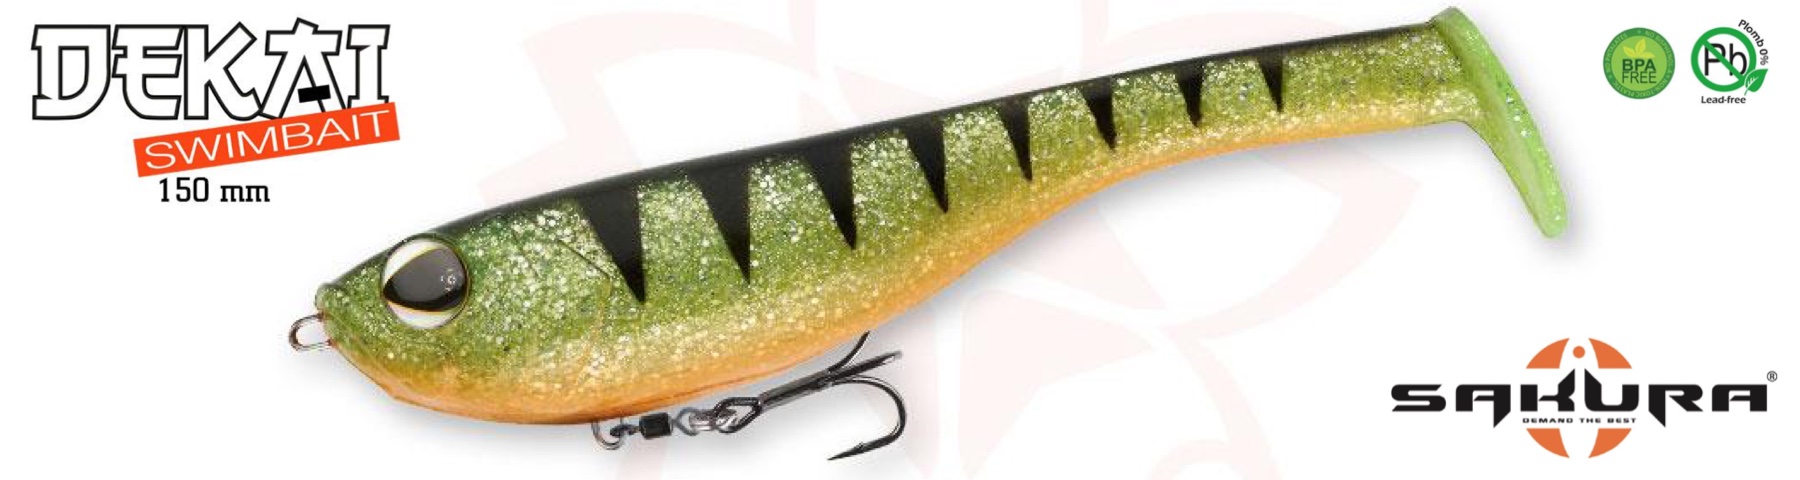 Estink Lure Bait, Fishing Lure, Fish Shape Fishing Tackle For Luring Fish Sea/ Water Outdoor Fun Adult Children Fishing Lover Blue Leopard,green Leopa